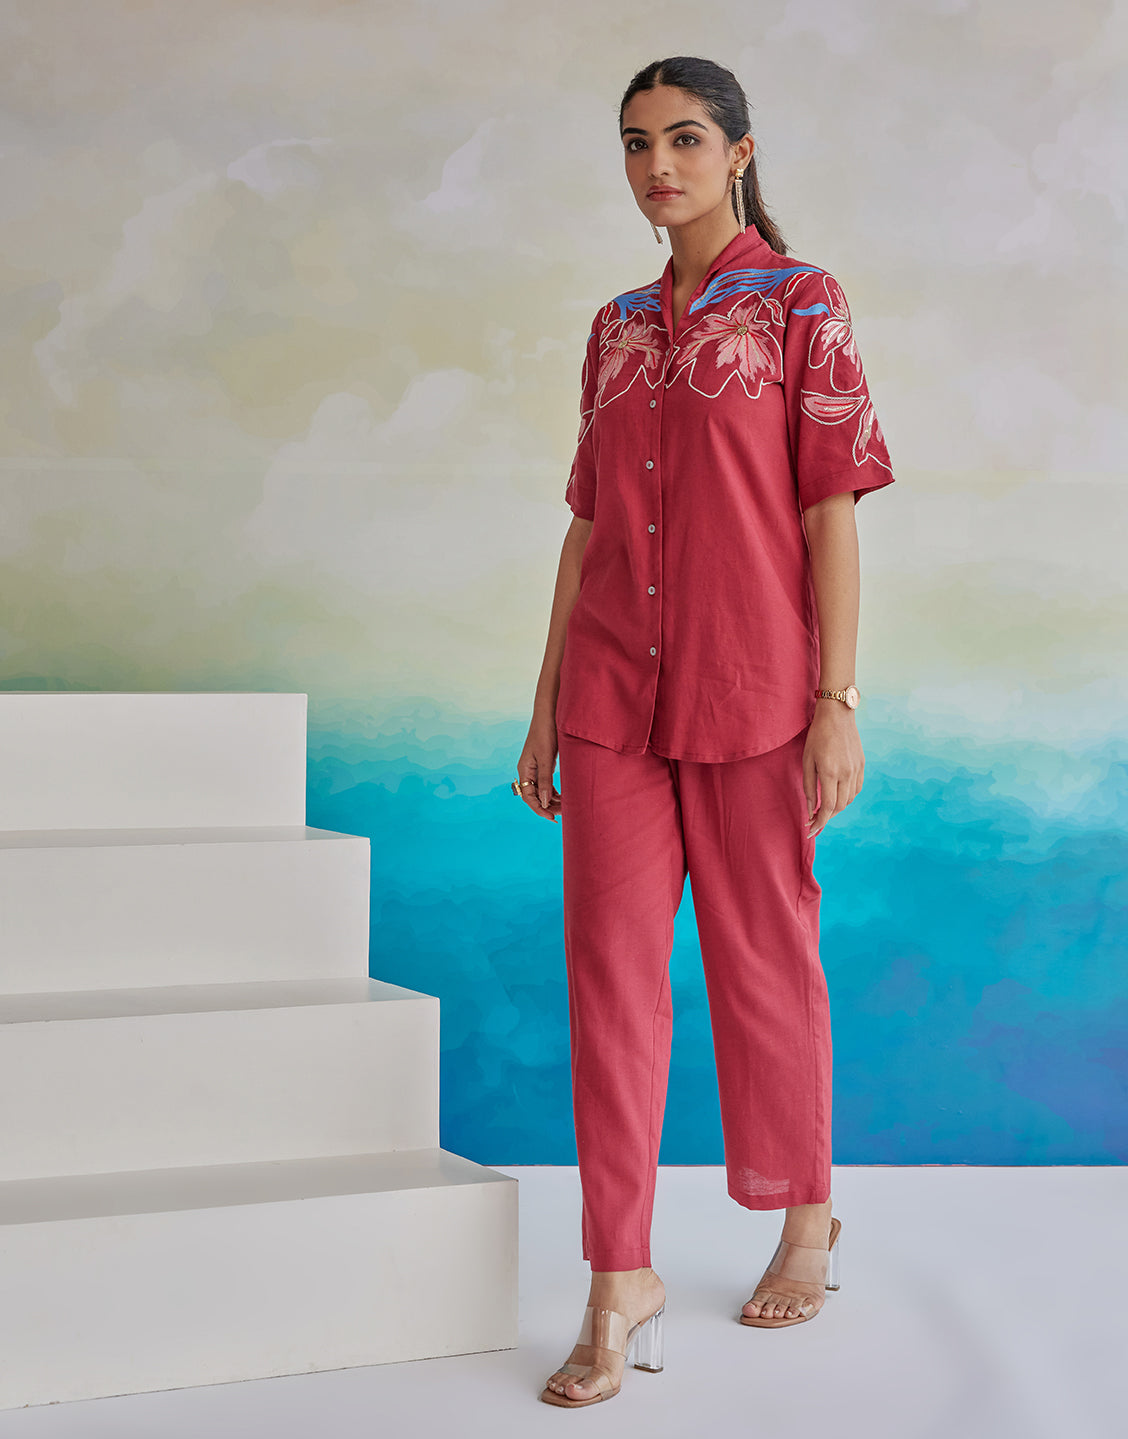 Red Floral Twist Thread Embroidery Work Viscose Flex Tunic Shirt and Pant Co-ord Set - Kaftanize